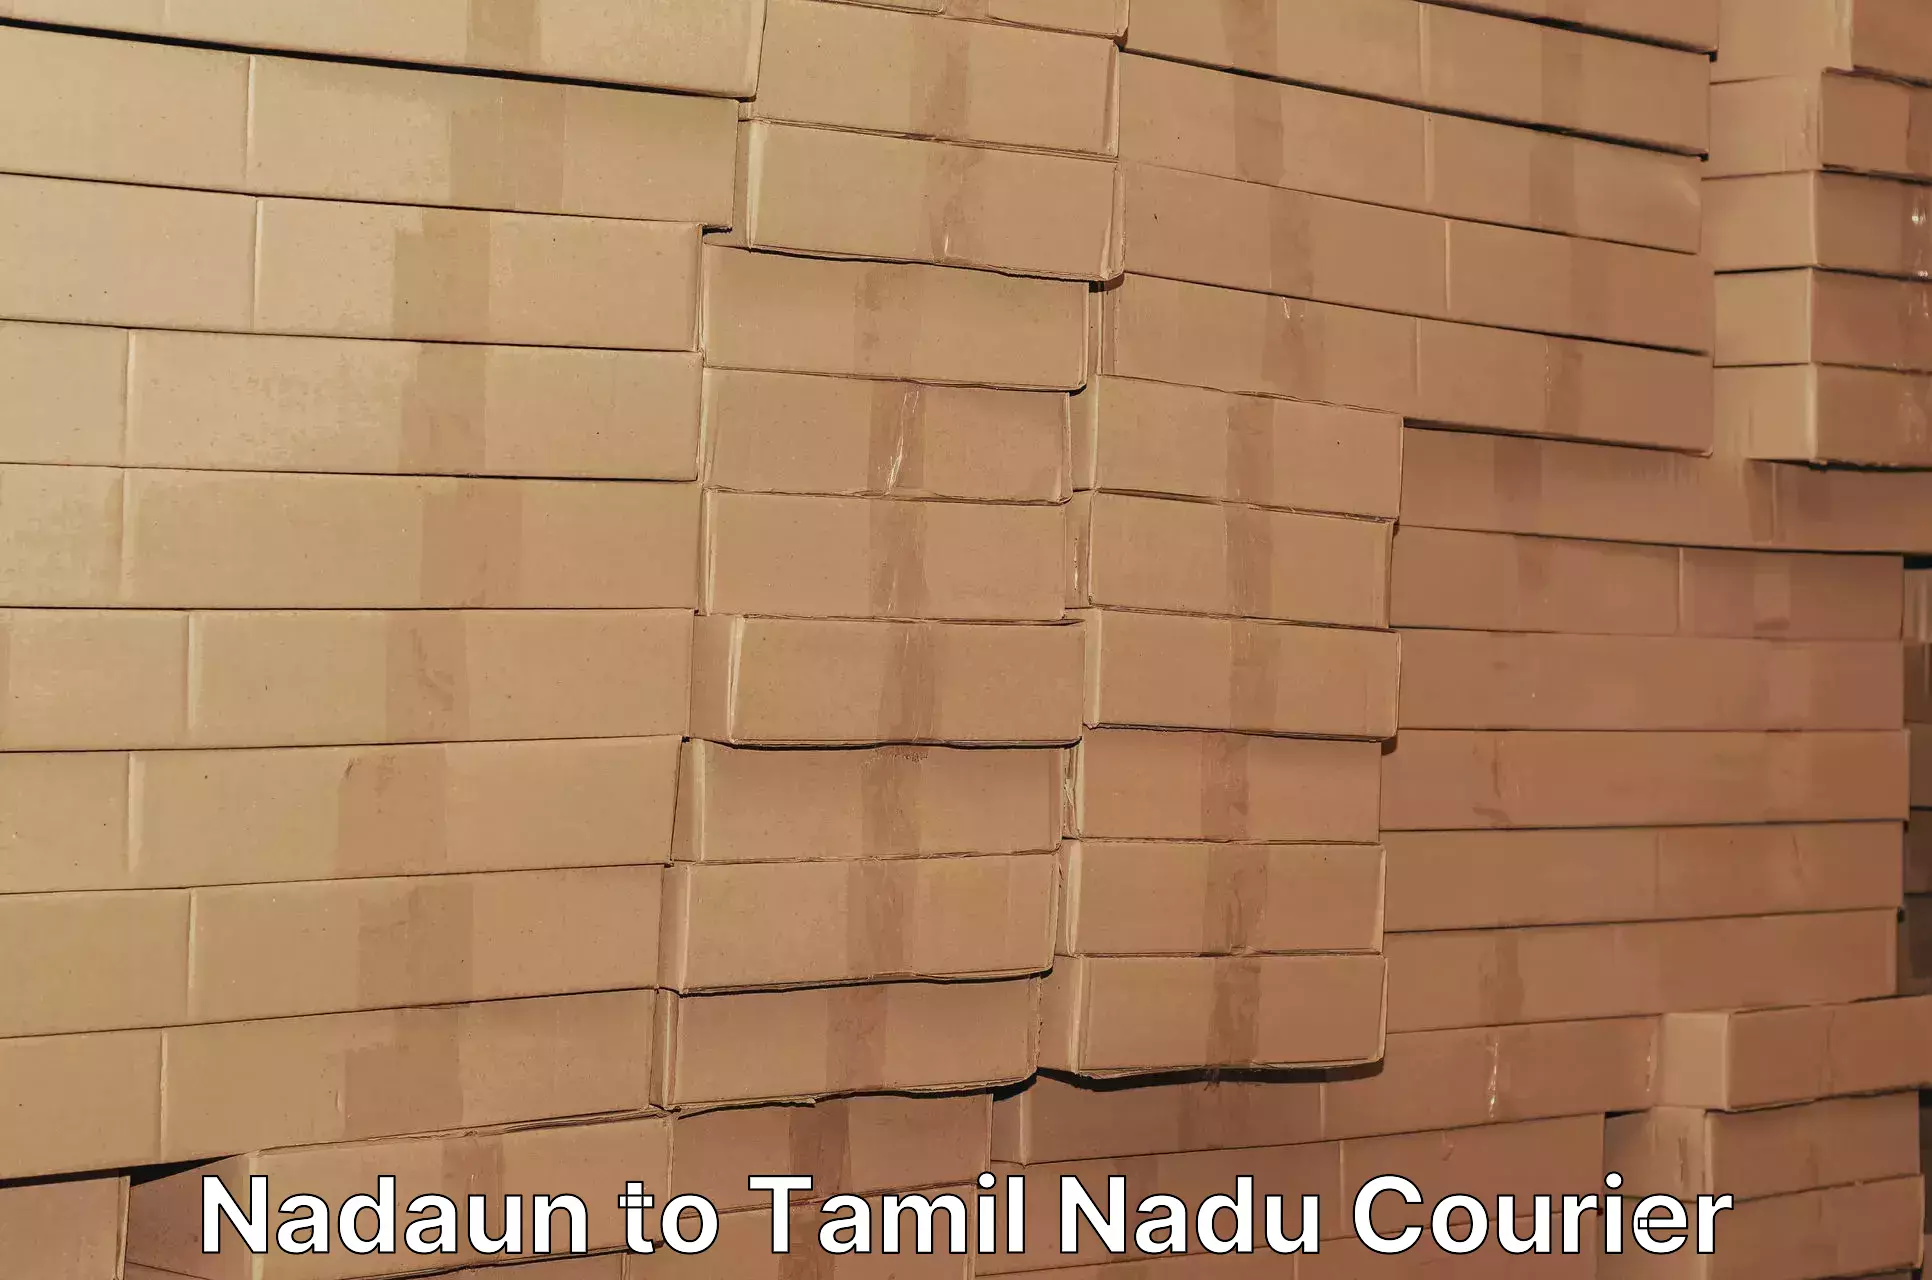 Nationwide parcel services Nadaun to Chennai